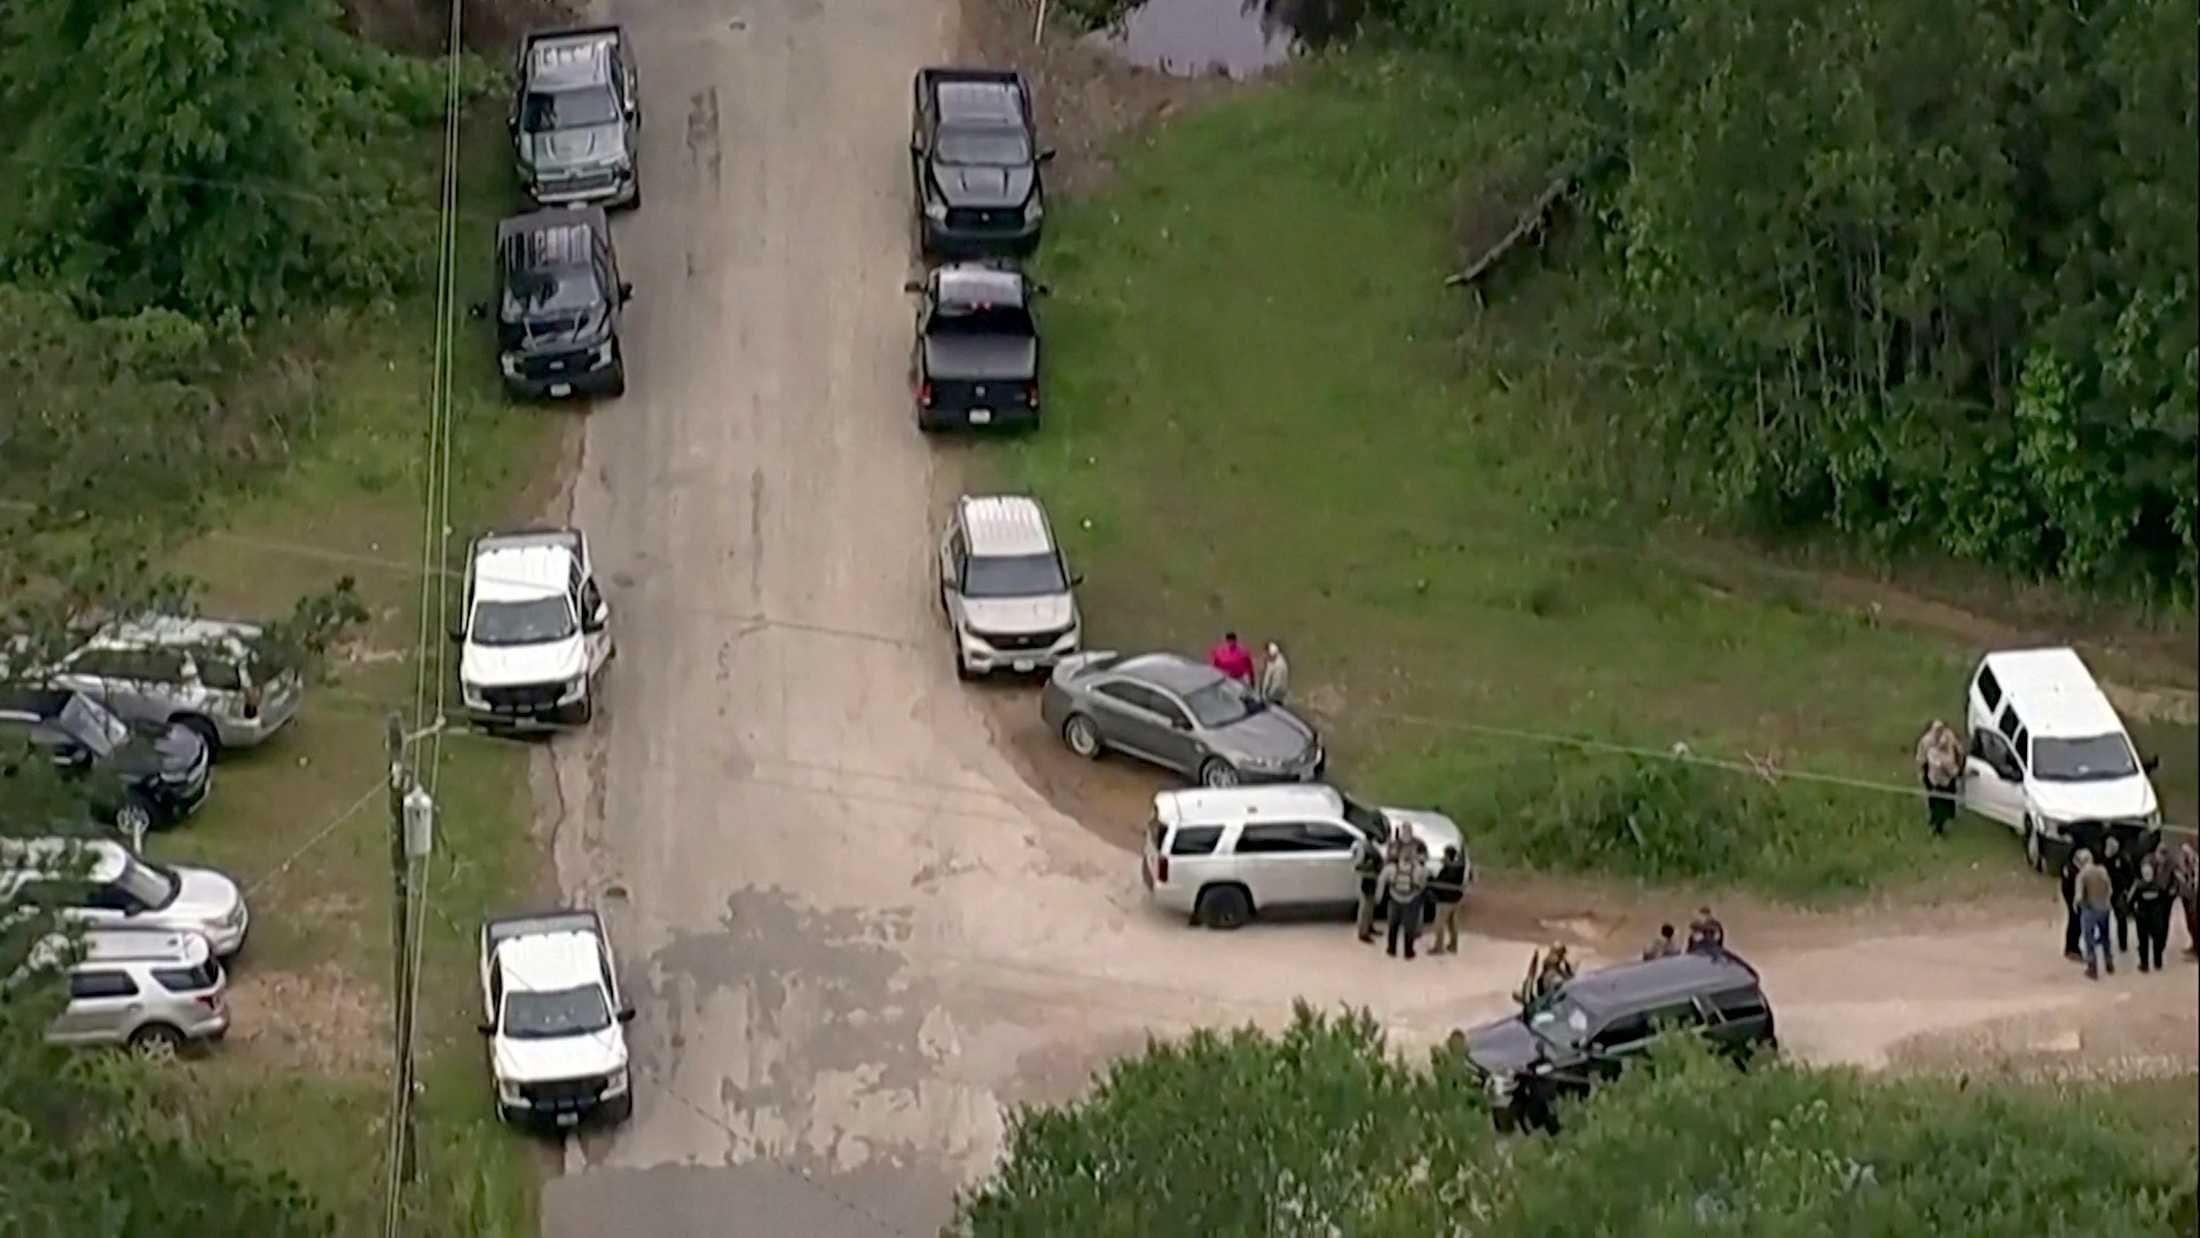 An aerial view shows the wooded area where a search is being conducted for Francisco Oropeza, who police say shot dead five neighbors in Cleveland, Texas, US April 29, in a still image from video. Photo: Reuters